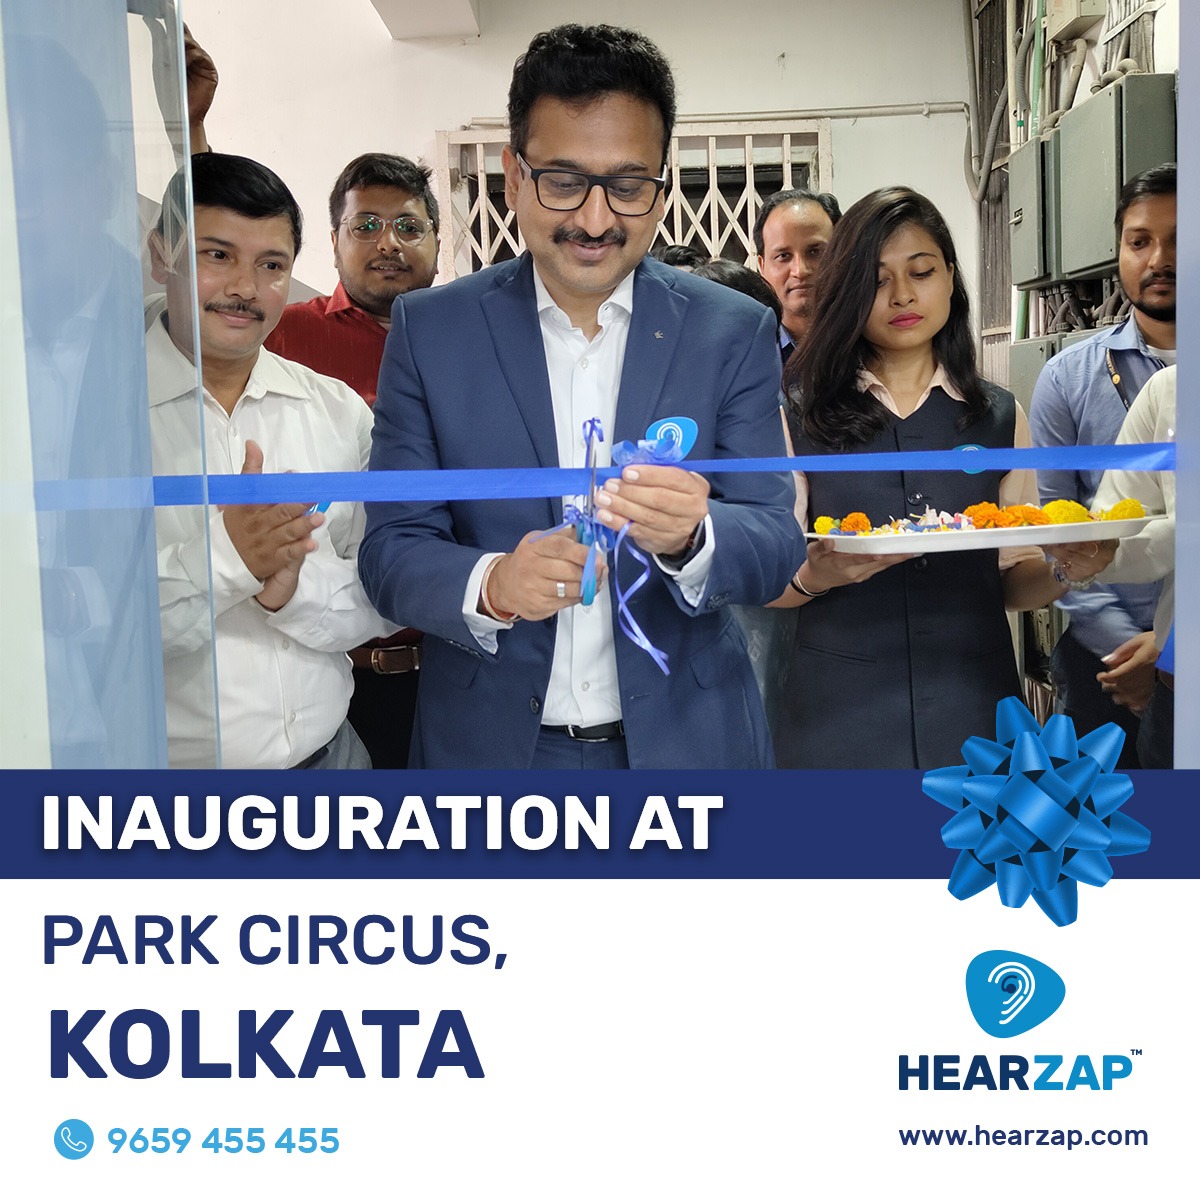 We just want to say Nomoshkaar to the wonderful community of Park Circus, #Kolkata! Experience top-notch hearing solutions at our latest #Hearzap store located at 201 Radiant Park, Park Street, Flat No. 1A, Near Bridge, Opposite Topsia Police Station, Kolkata, #WestBengal.